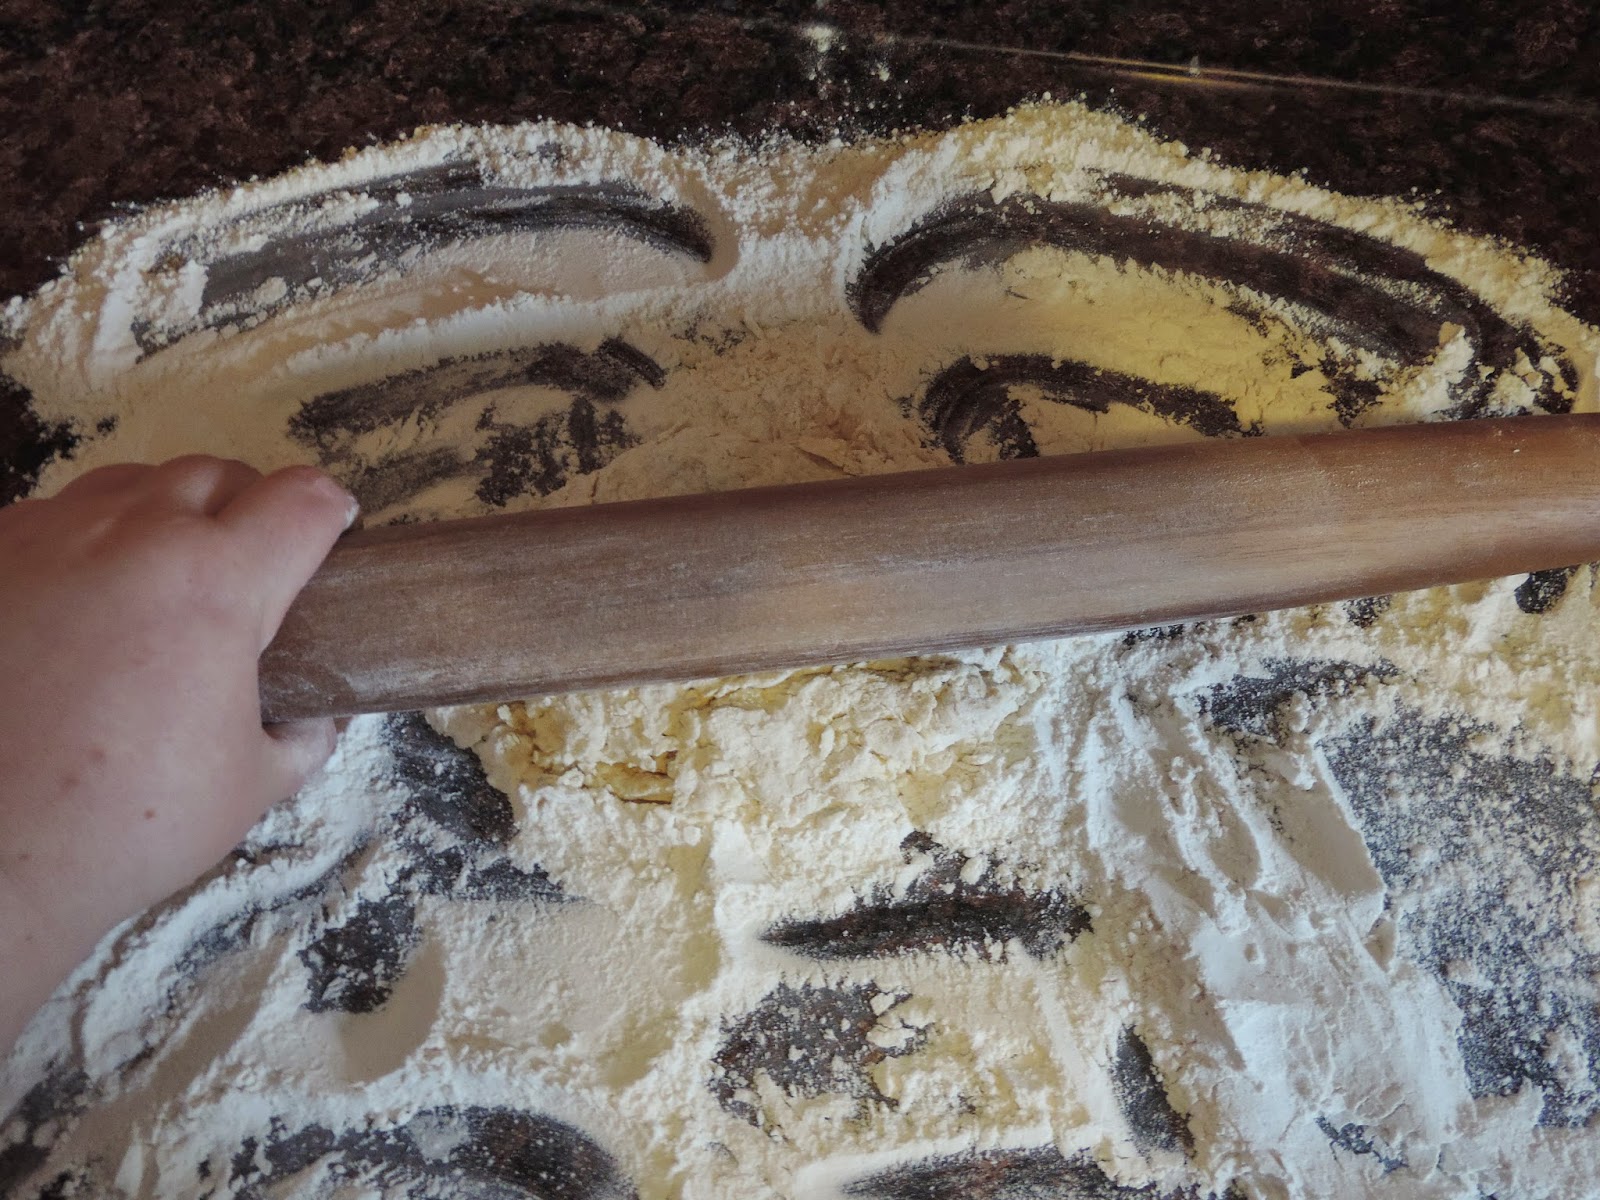 The homemade noodle dough being rolled out on the floured surface. 